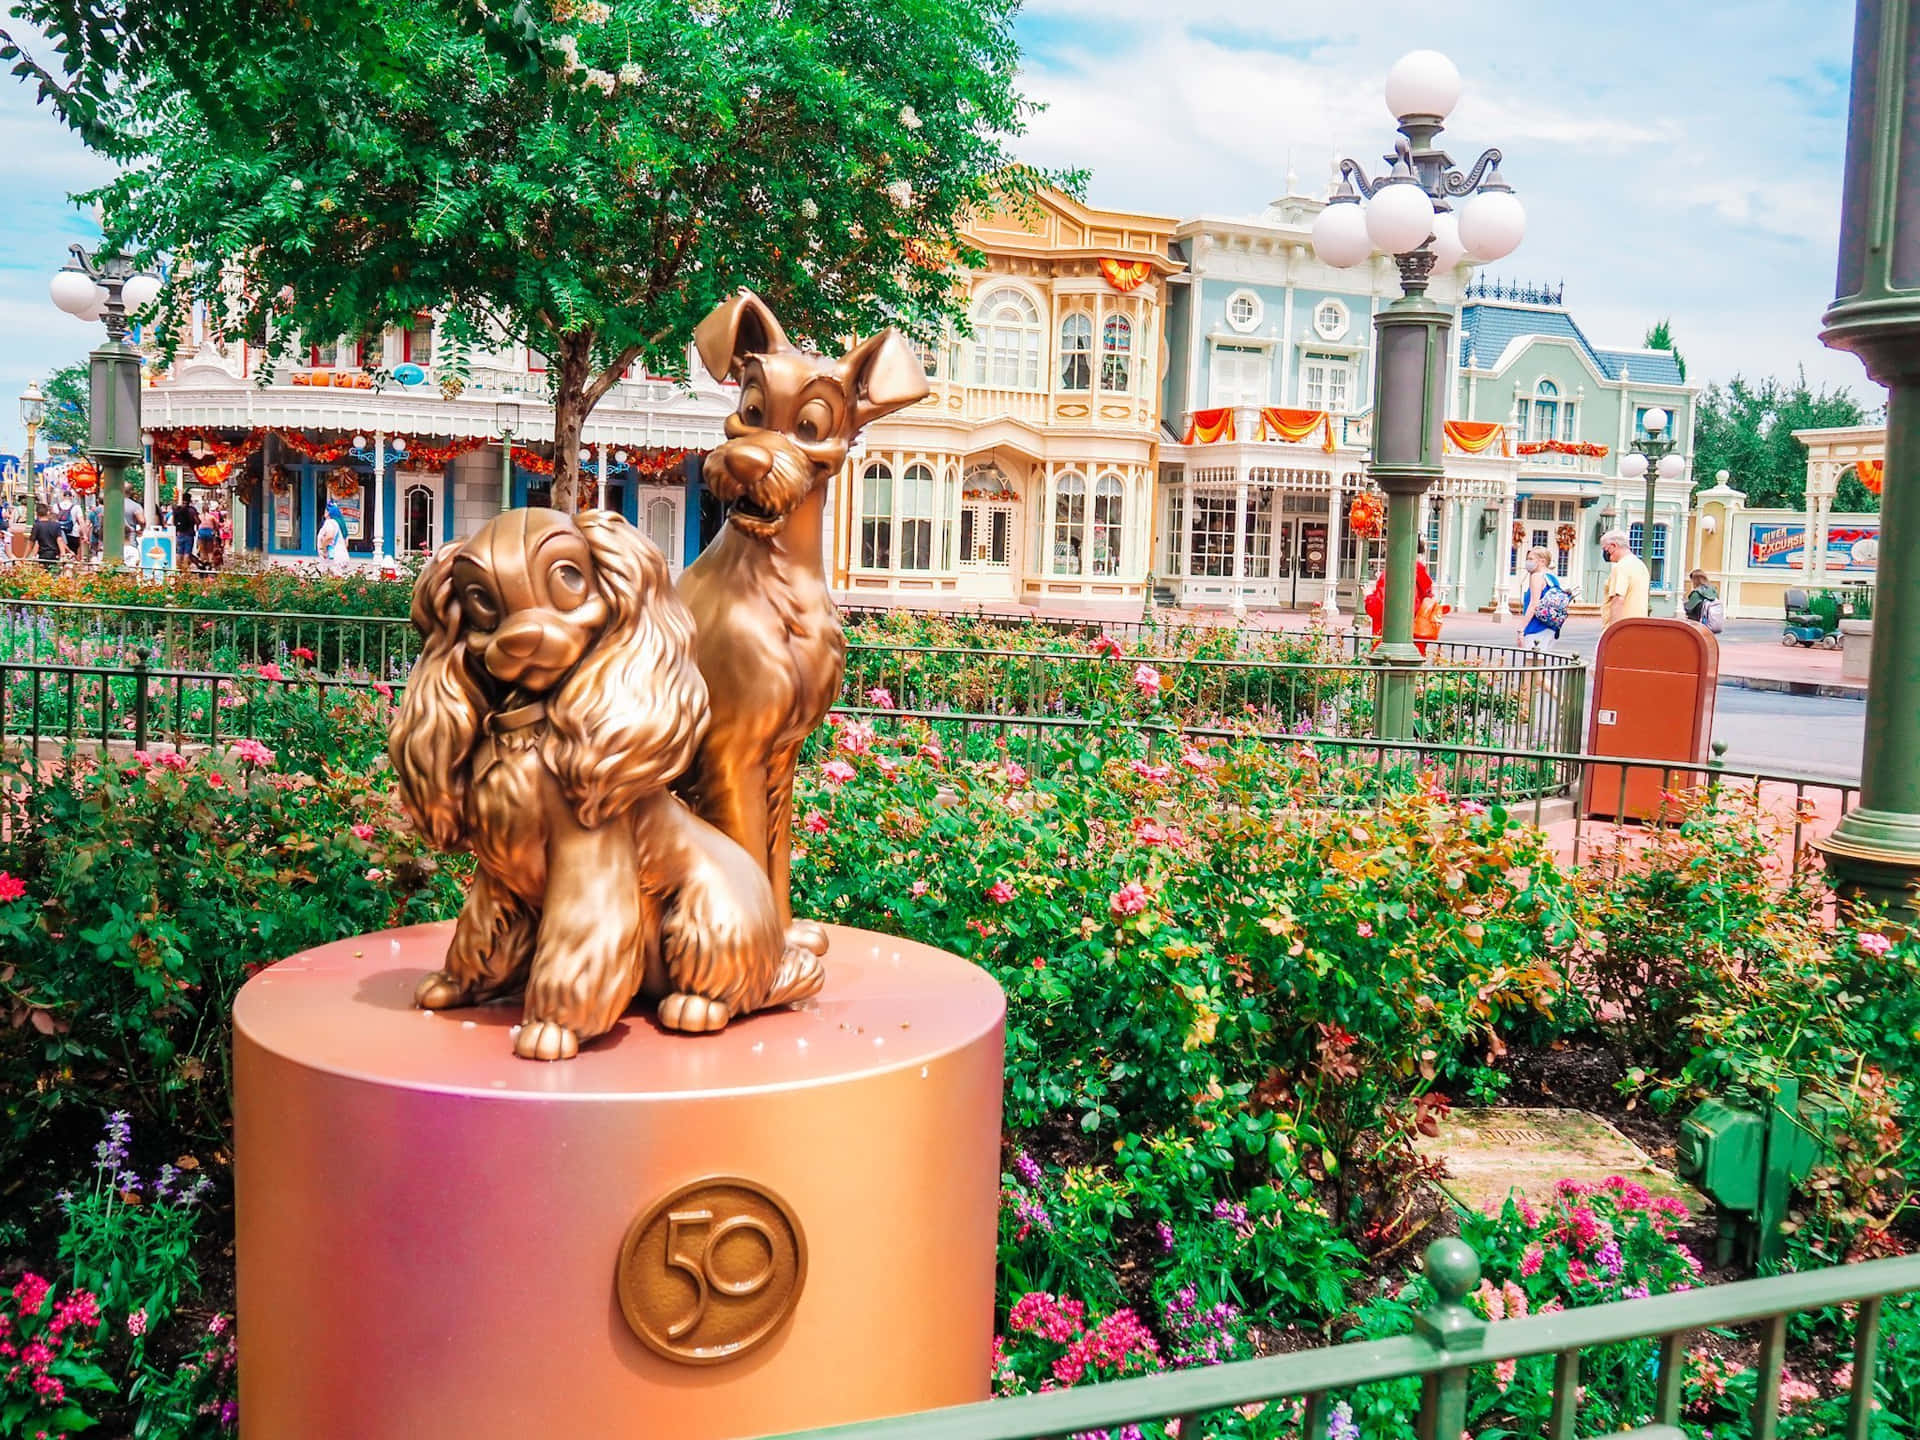 Spend a Magical Day at The Most Magical Place on Earth!